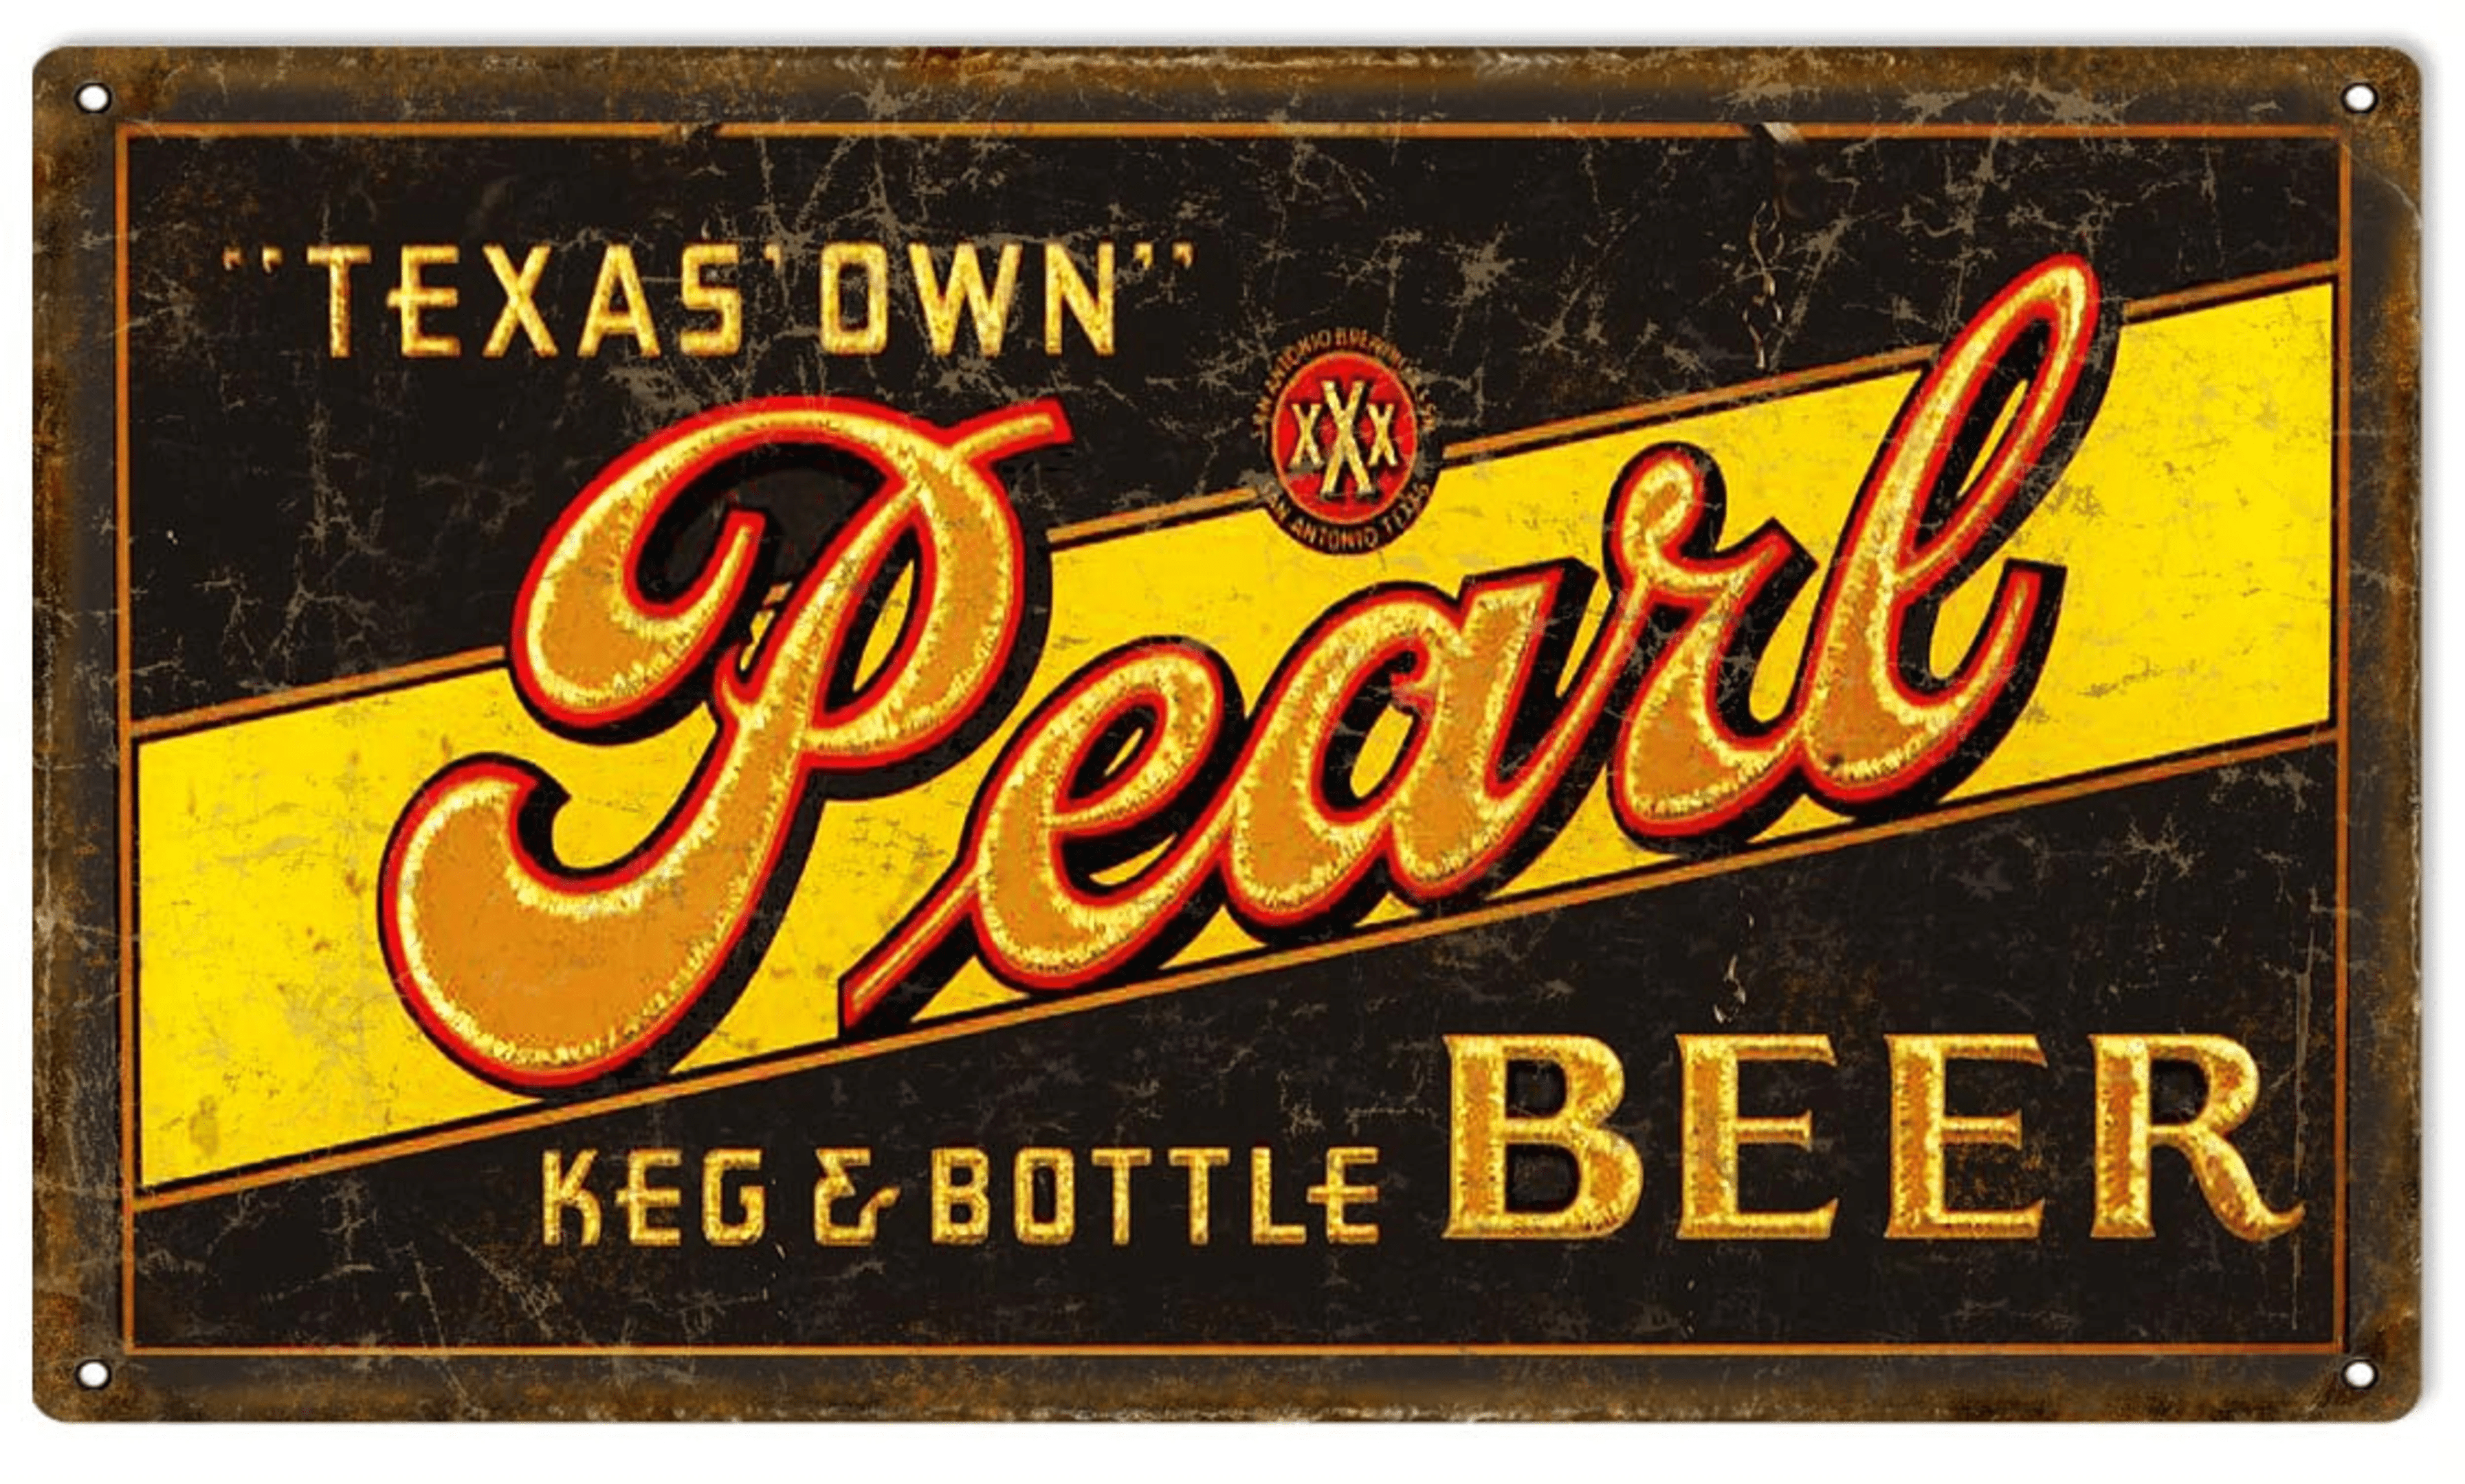 Texas Own Pearl Keg & Bottle Beer Metal Sign 14 x 8 vintage style bar man cave retro country advertising art wall decor RG